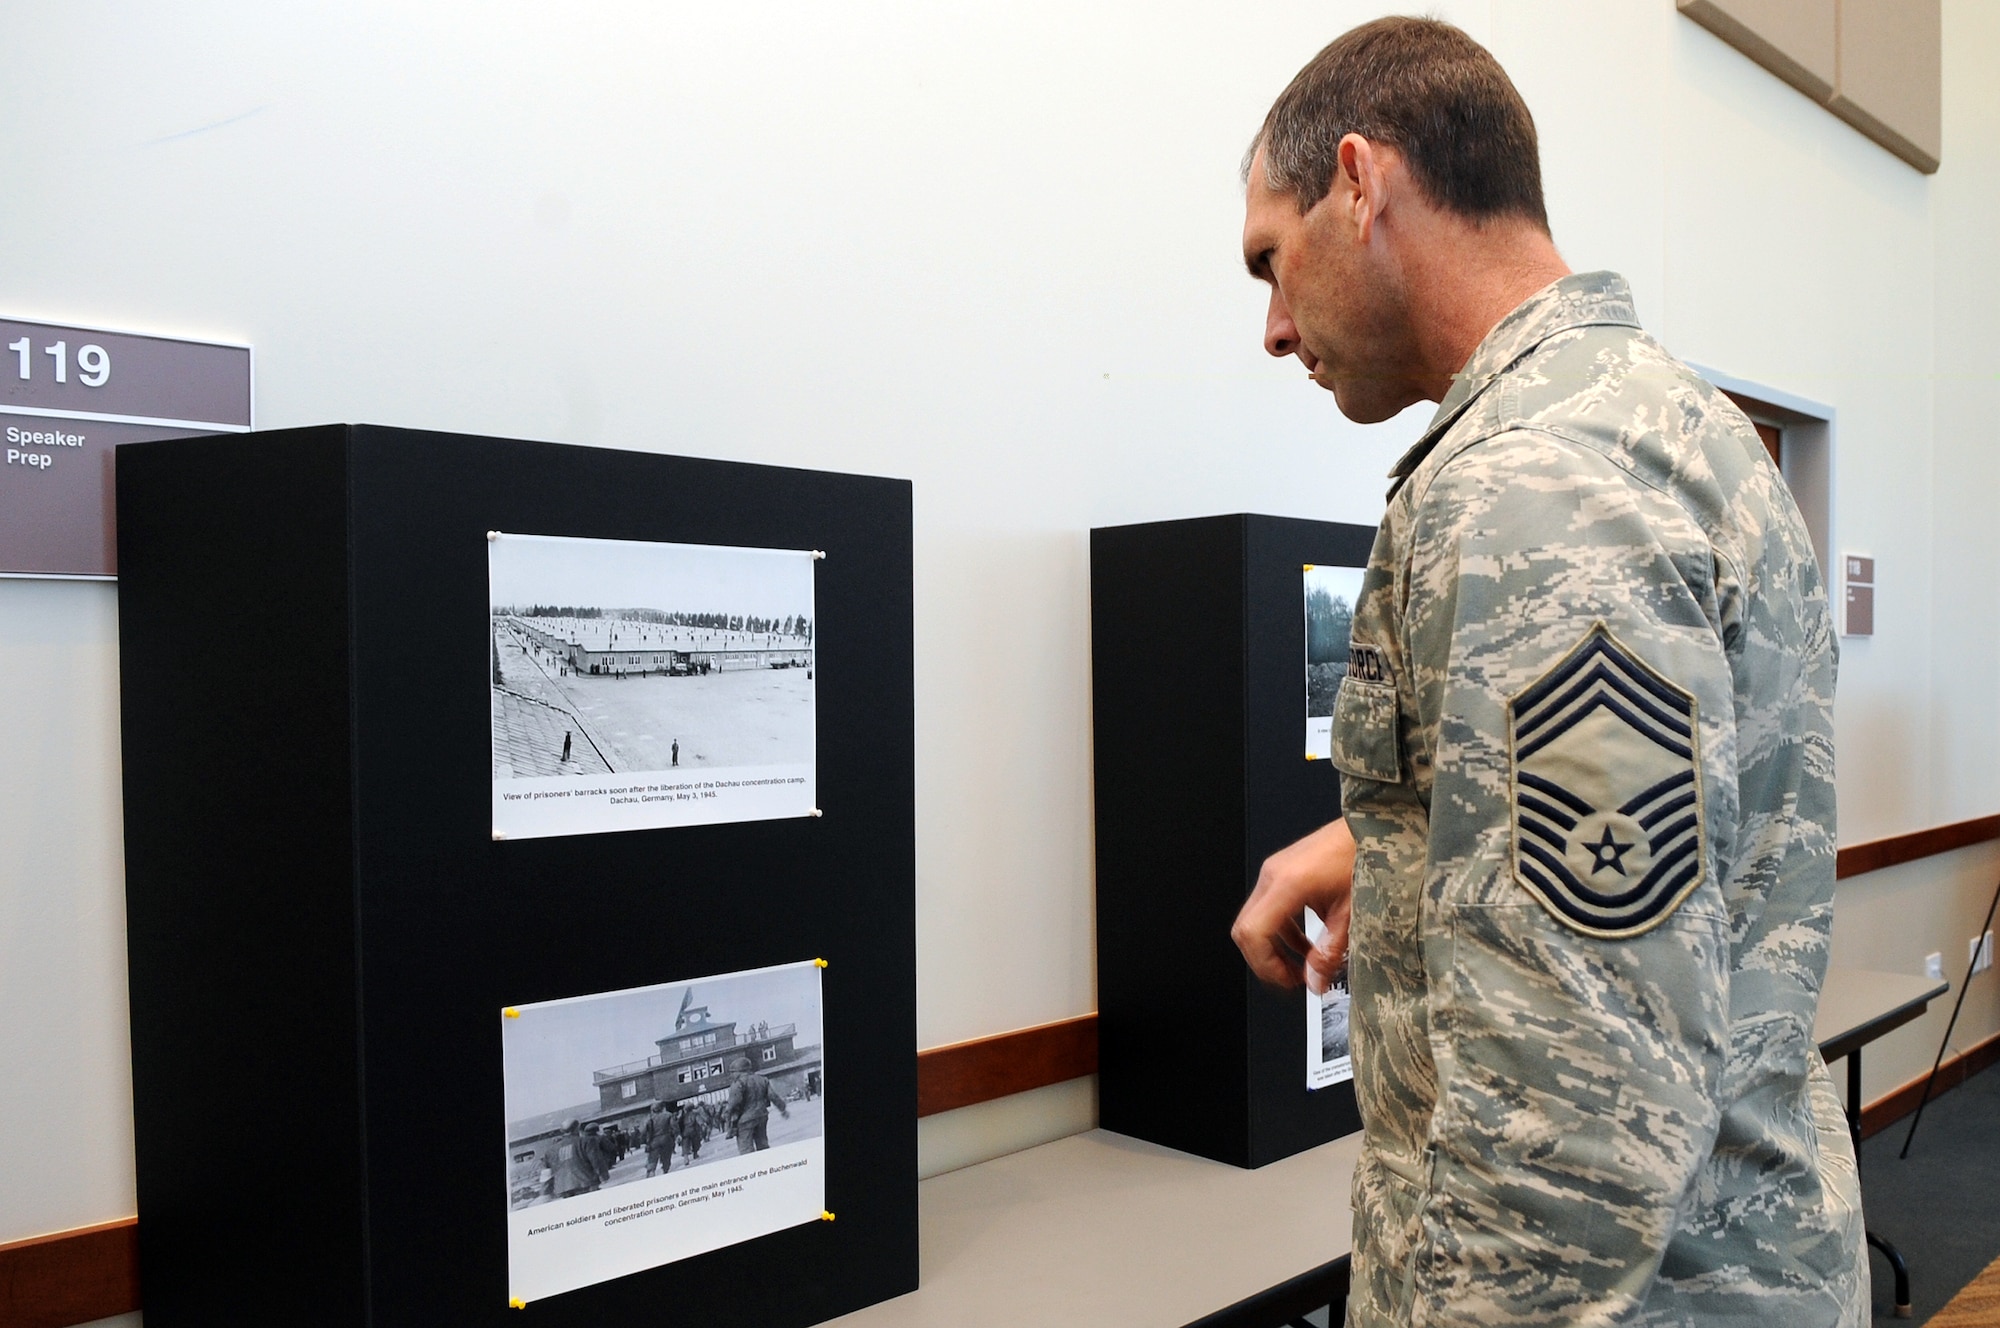 BUCKLEY AIR FORCE BASE, Colo. -- Chief Master Sgt. Todd Kennedy, 460th Operations Group superintendent, views photos of Holocaust victims April 9. A display was set up in the Leadership Development Center as part of the Days of Remembrance. (U.S. Air Force Photo by Airman 1st Class Marcy Glass)
